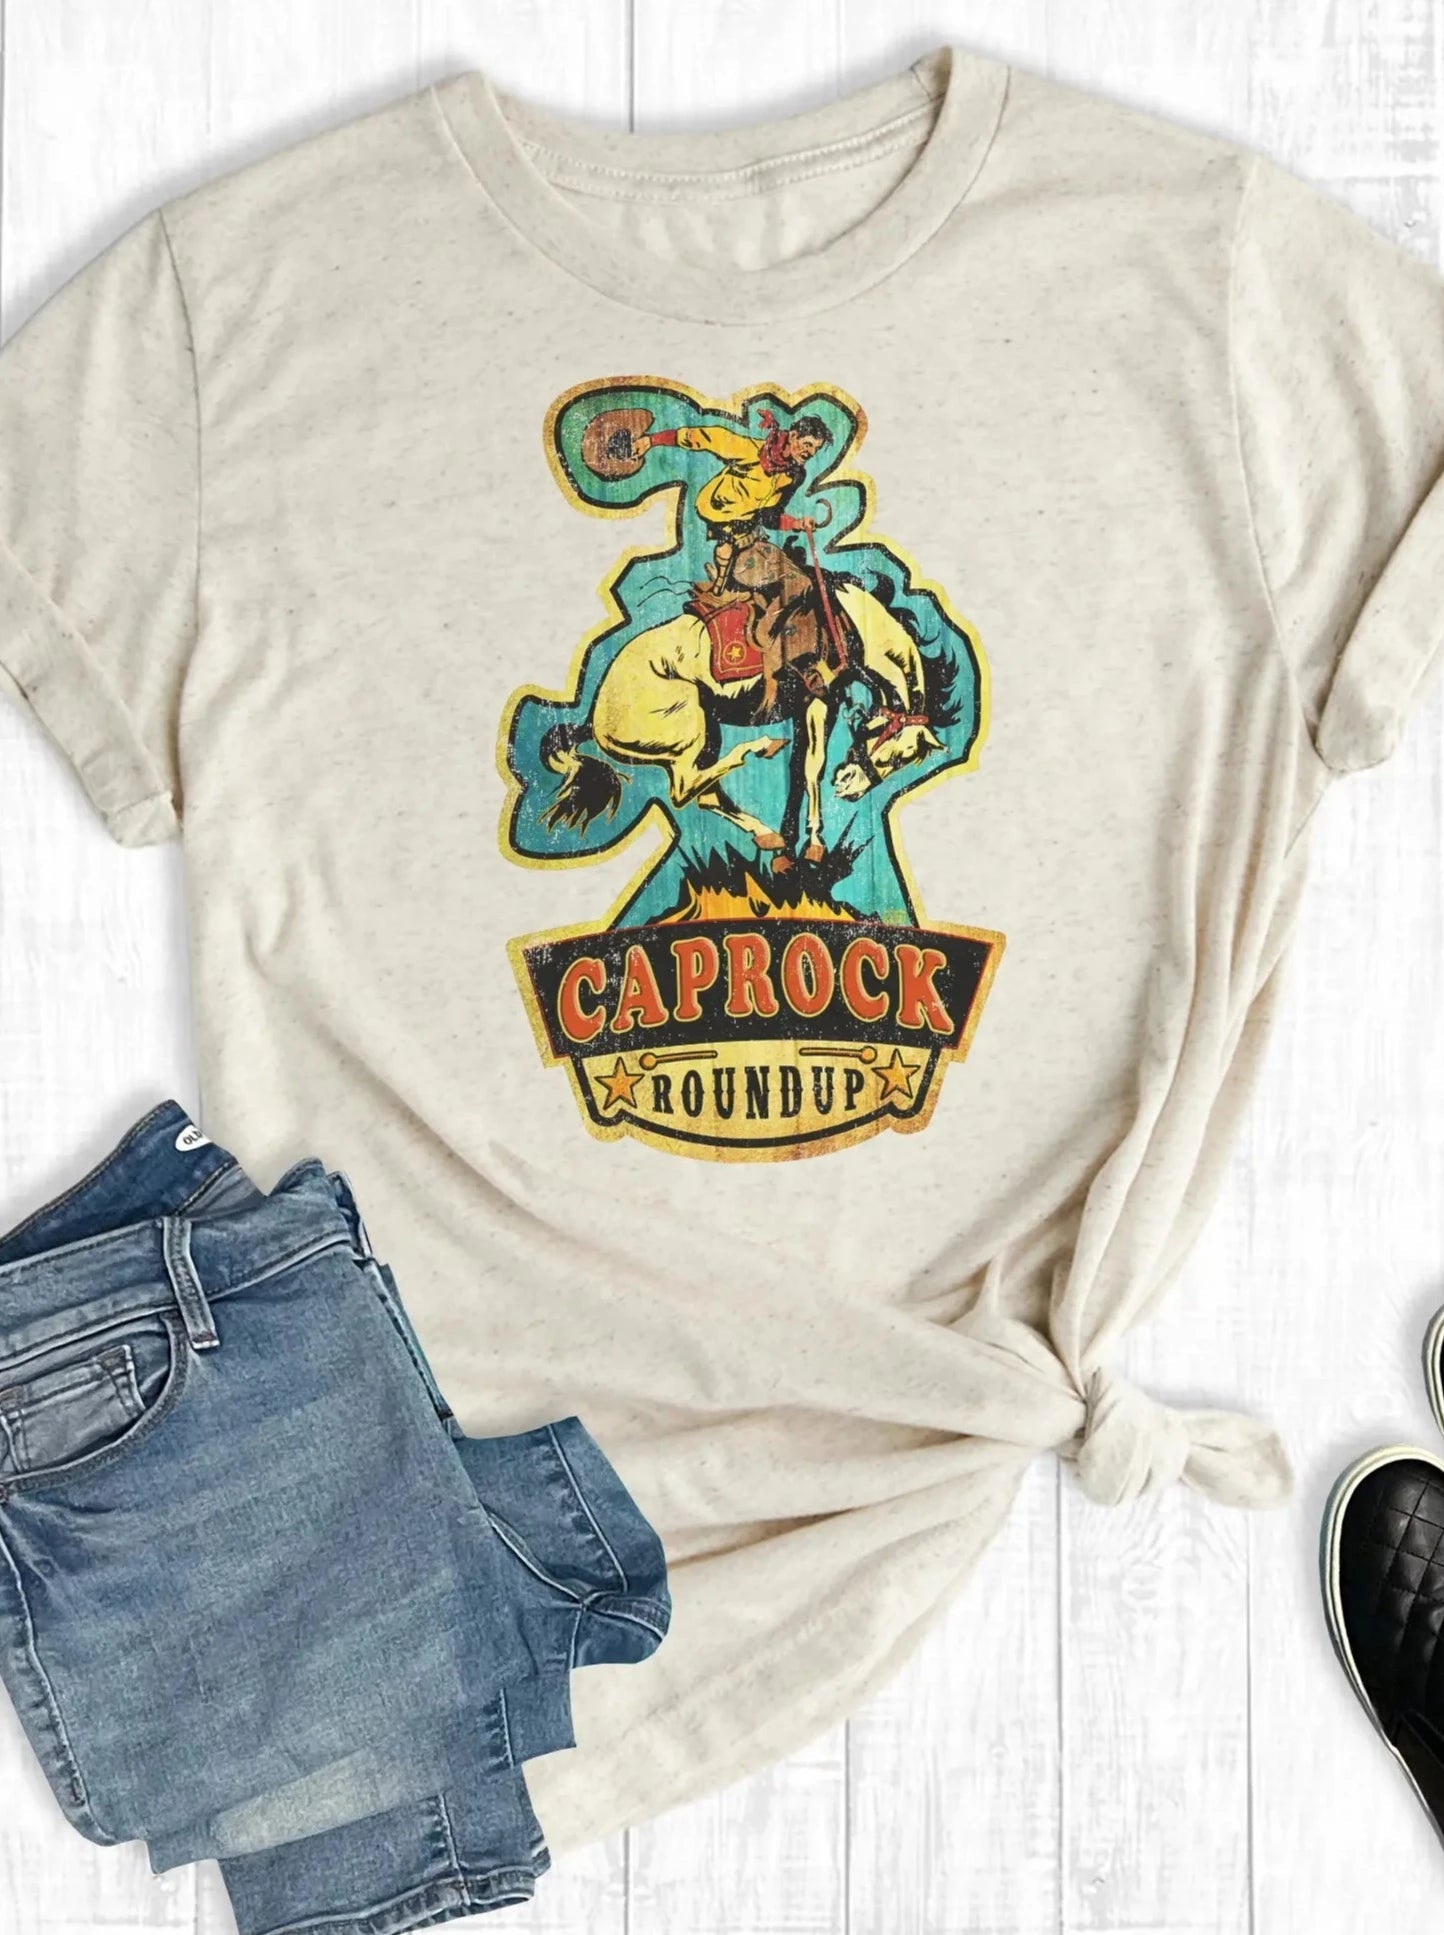 Graphic Tees Limited Edition Caprock Roundup Tee